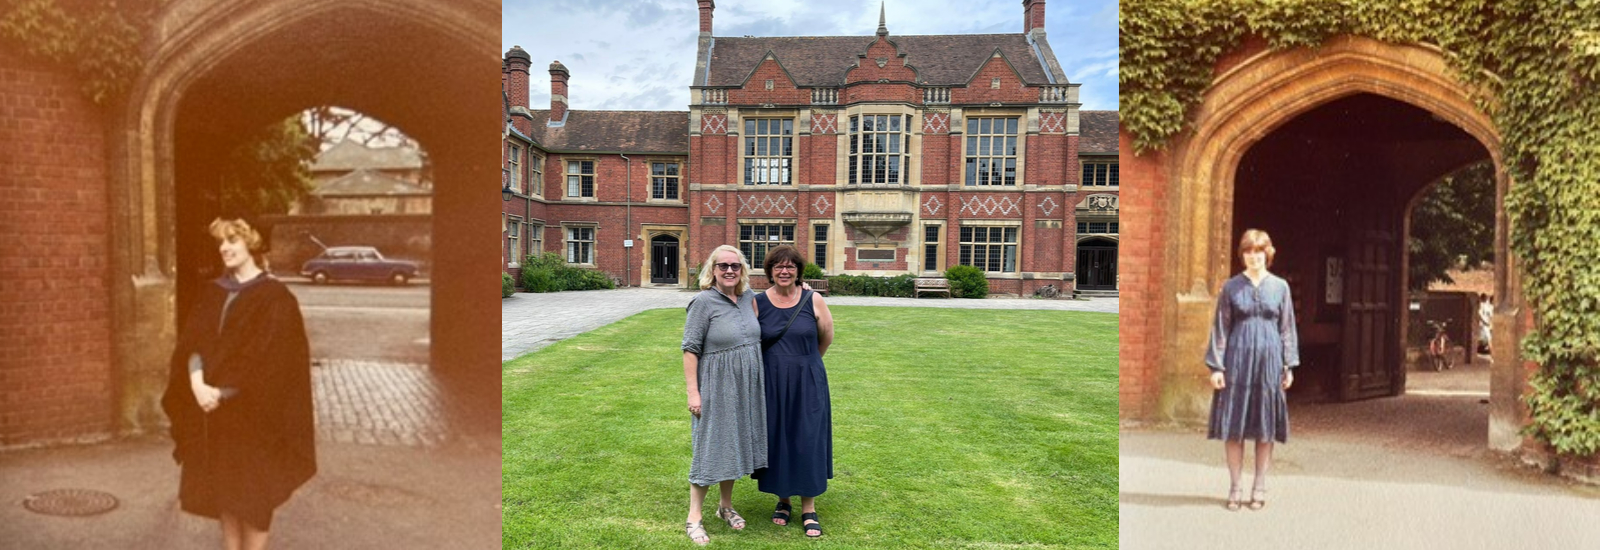 Gill & Liz at Wantage Hall in 2023 and on graduation day in 1981